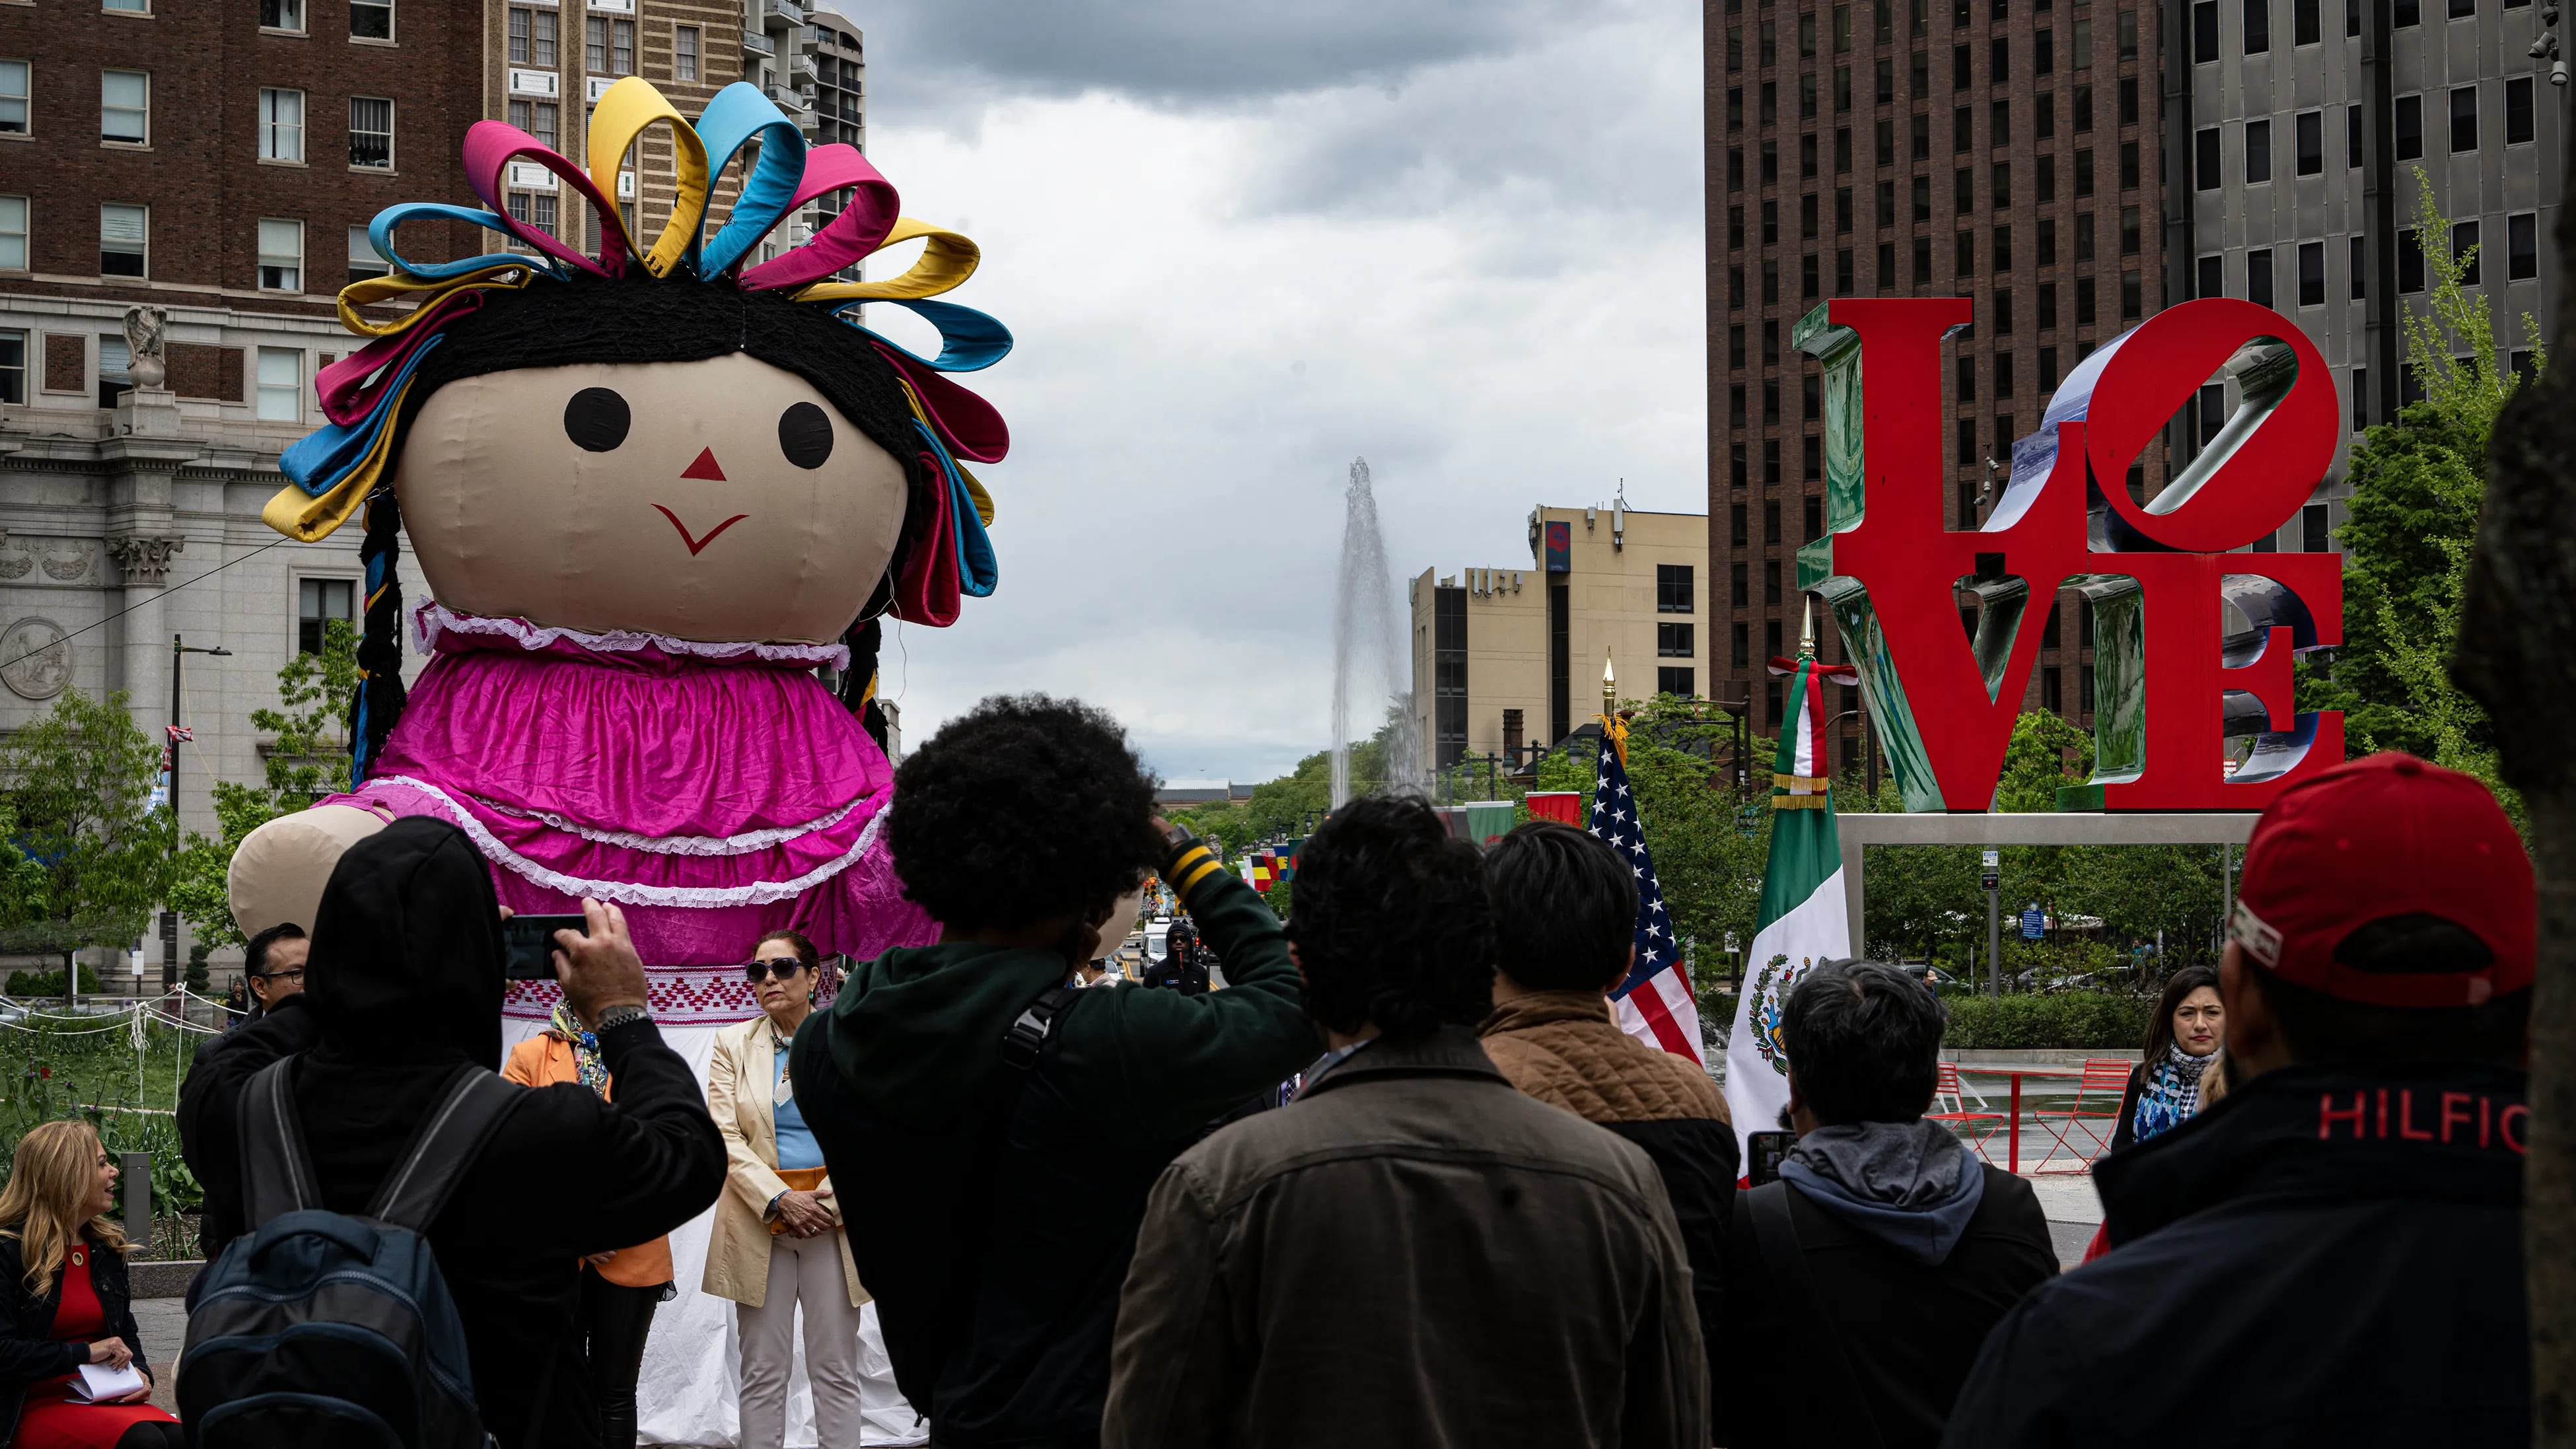 As part of Mexican Week, people gathered at Love Park to see  Lele. A 13-foot-tall handmade doll that represents Mexico's Otomi native communities of Amealco, in Querétaro.